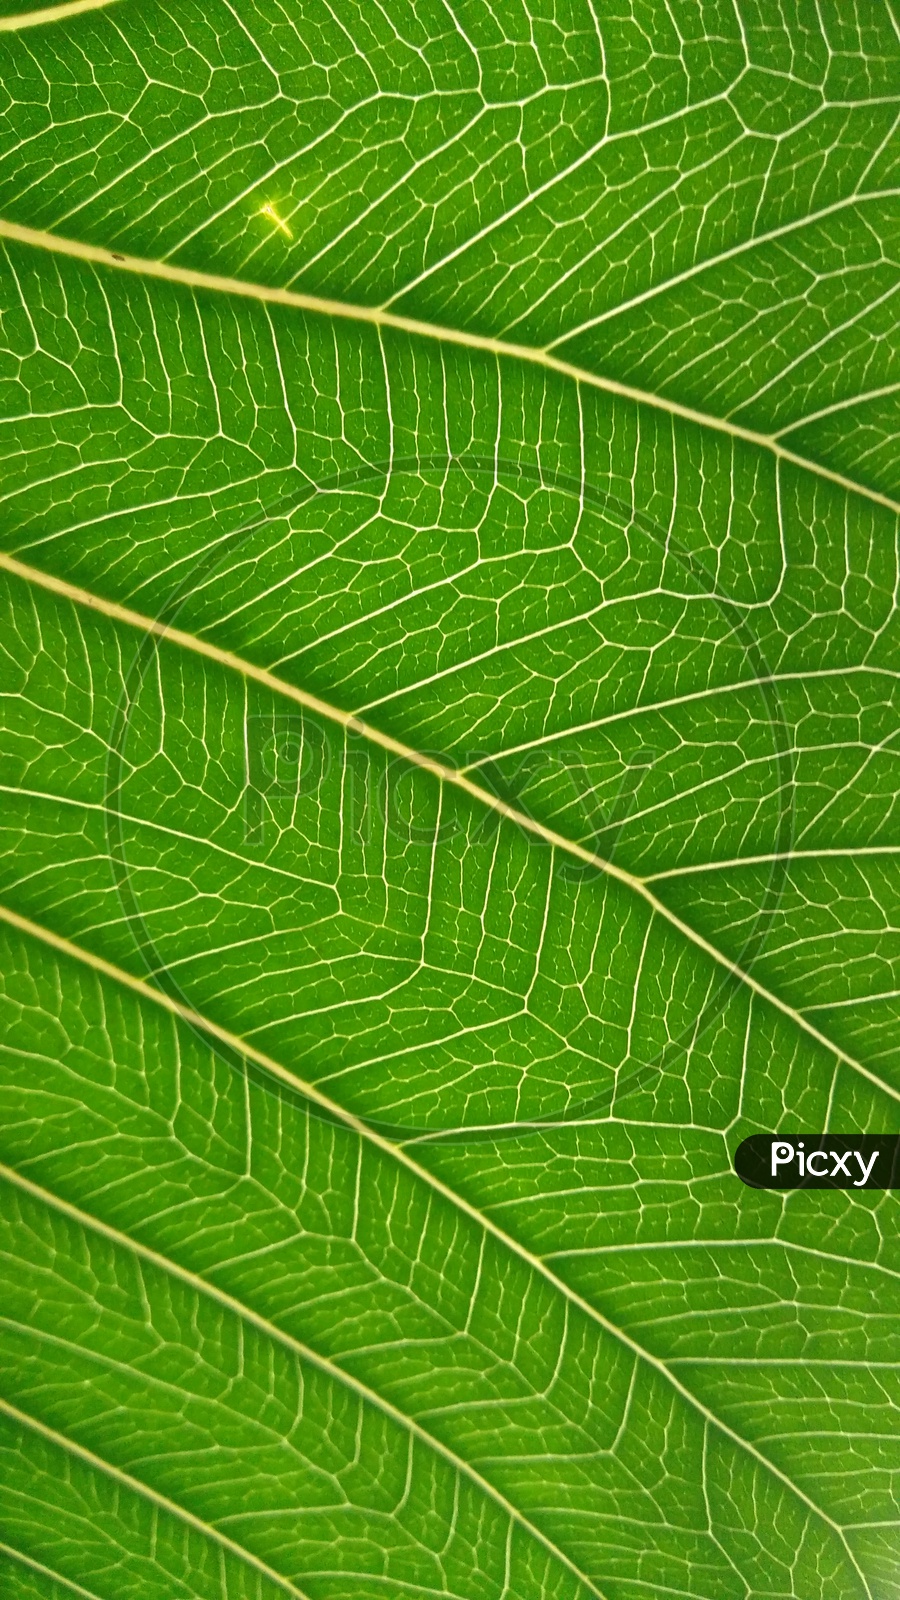 Texture Of a A Green Leaf With Patterns